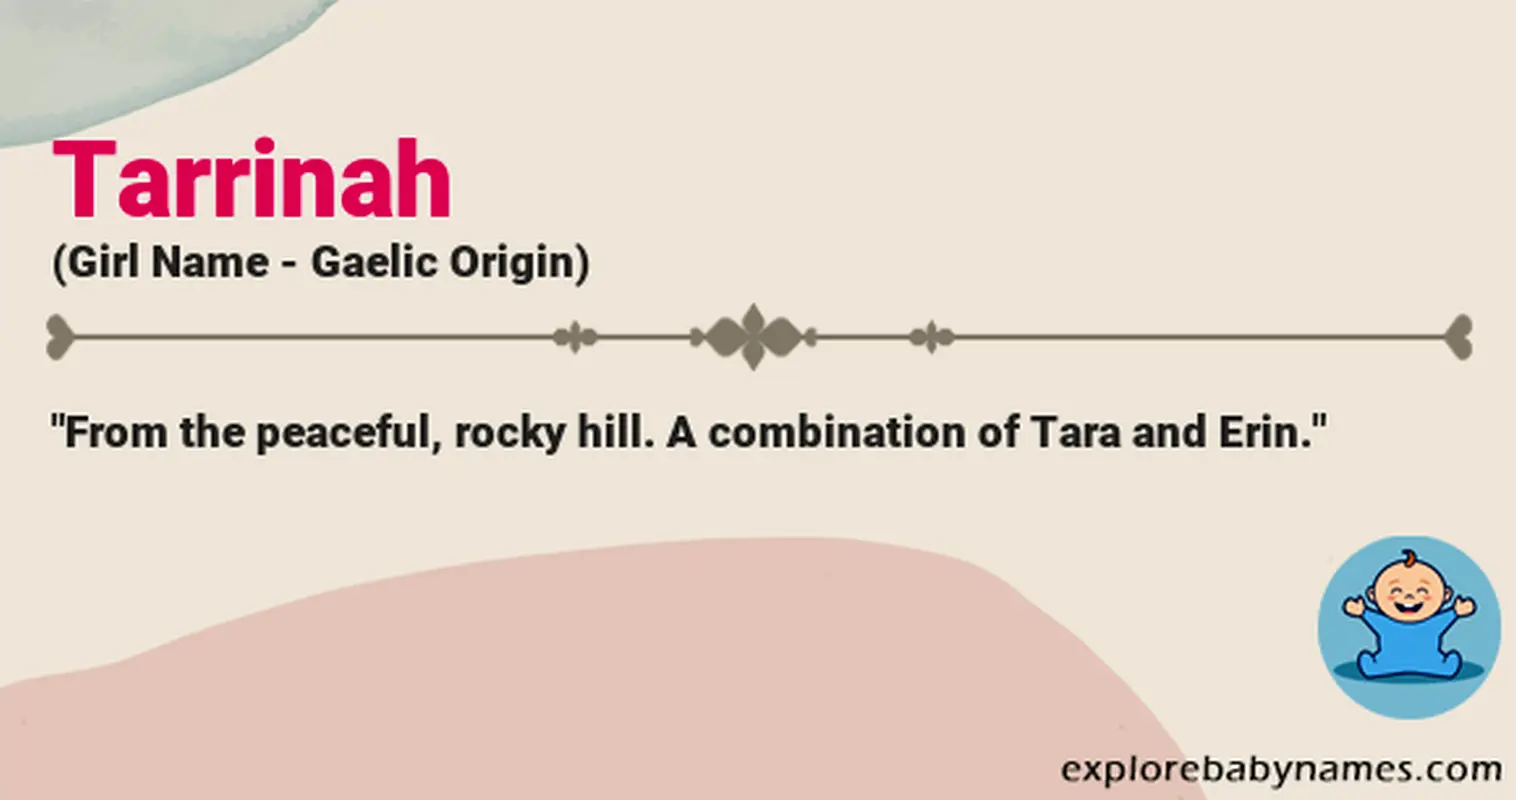 Meaning of Tarrinah